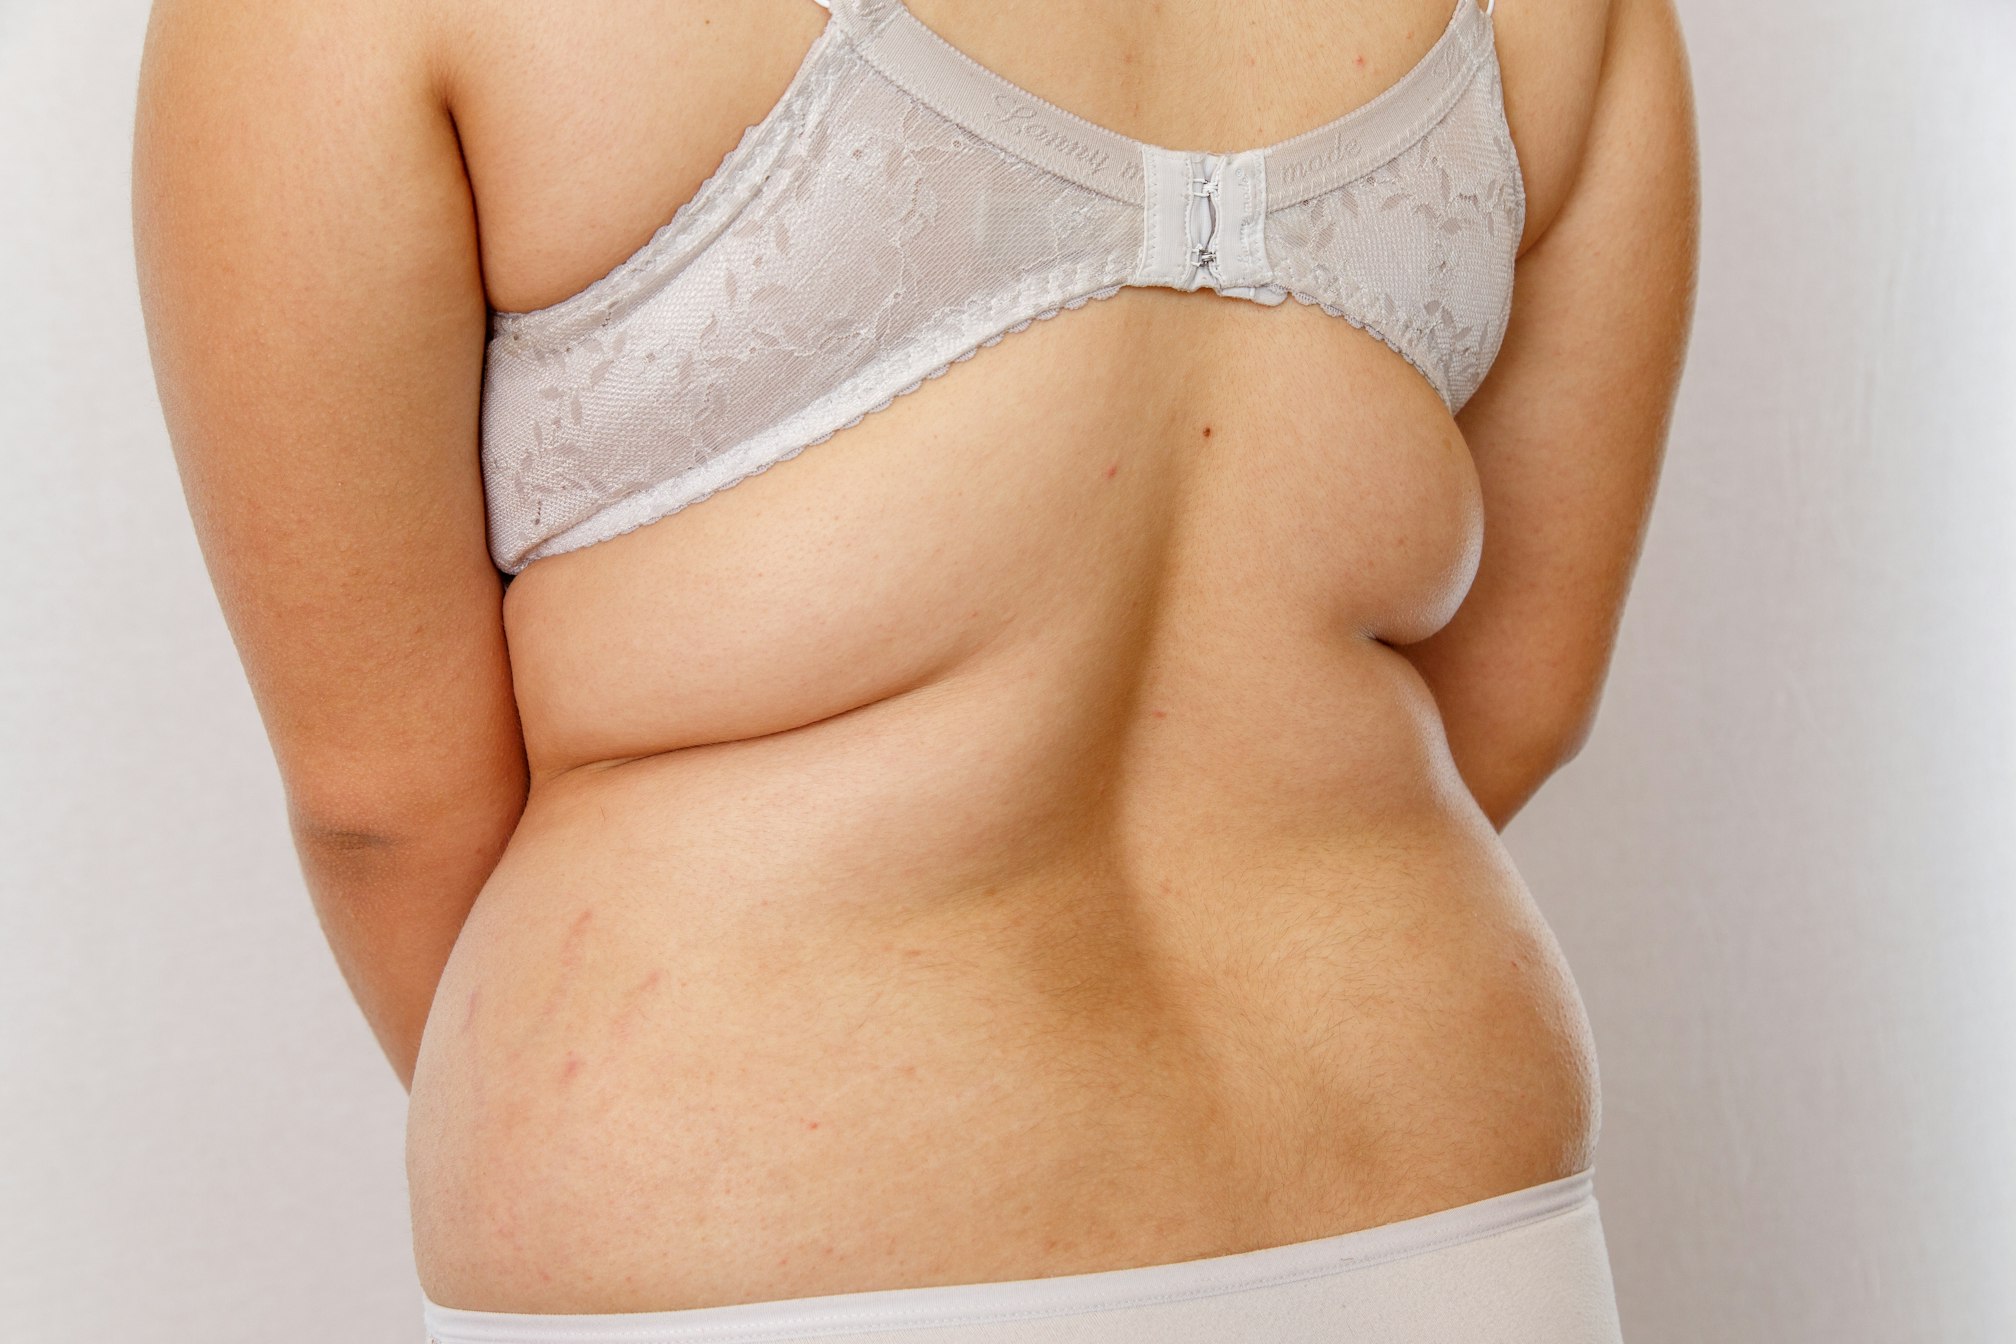 A woman's backside in a bra against a white background shows changes in the body, fat deposits on the body.